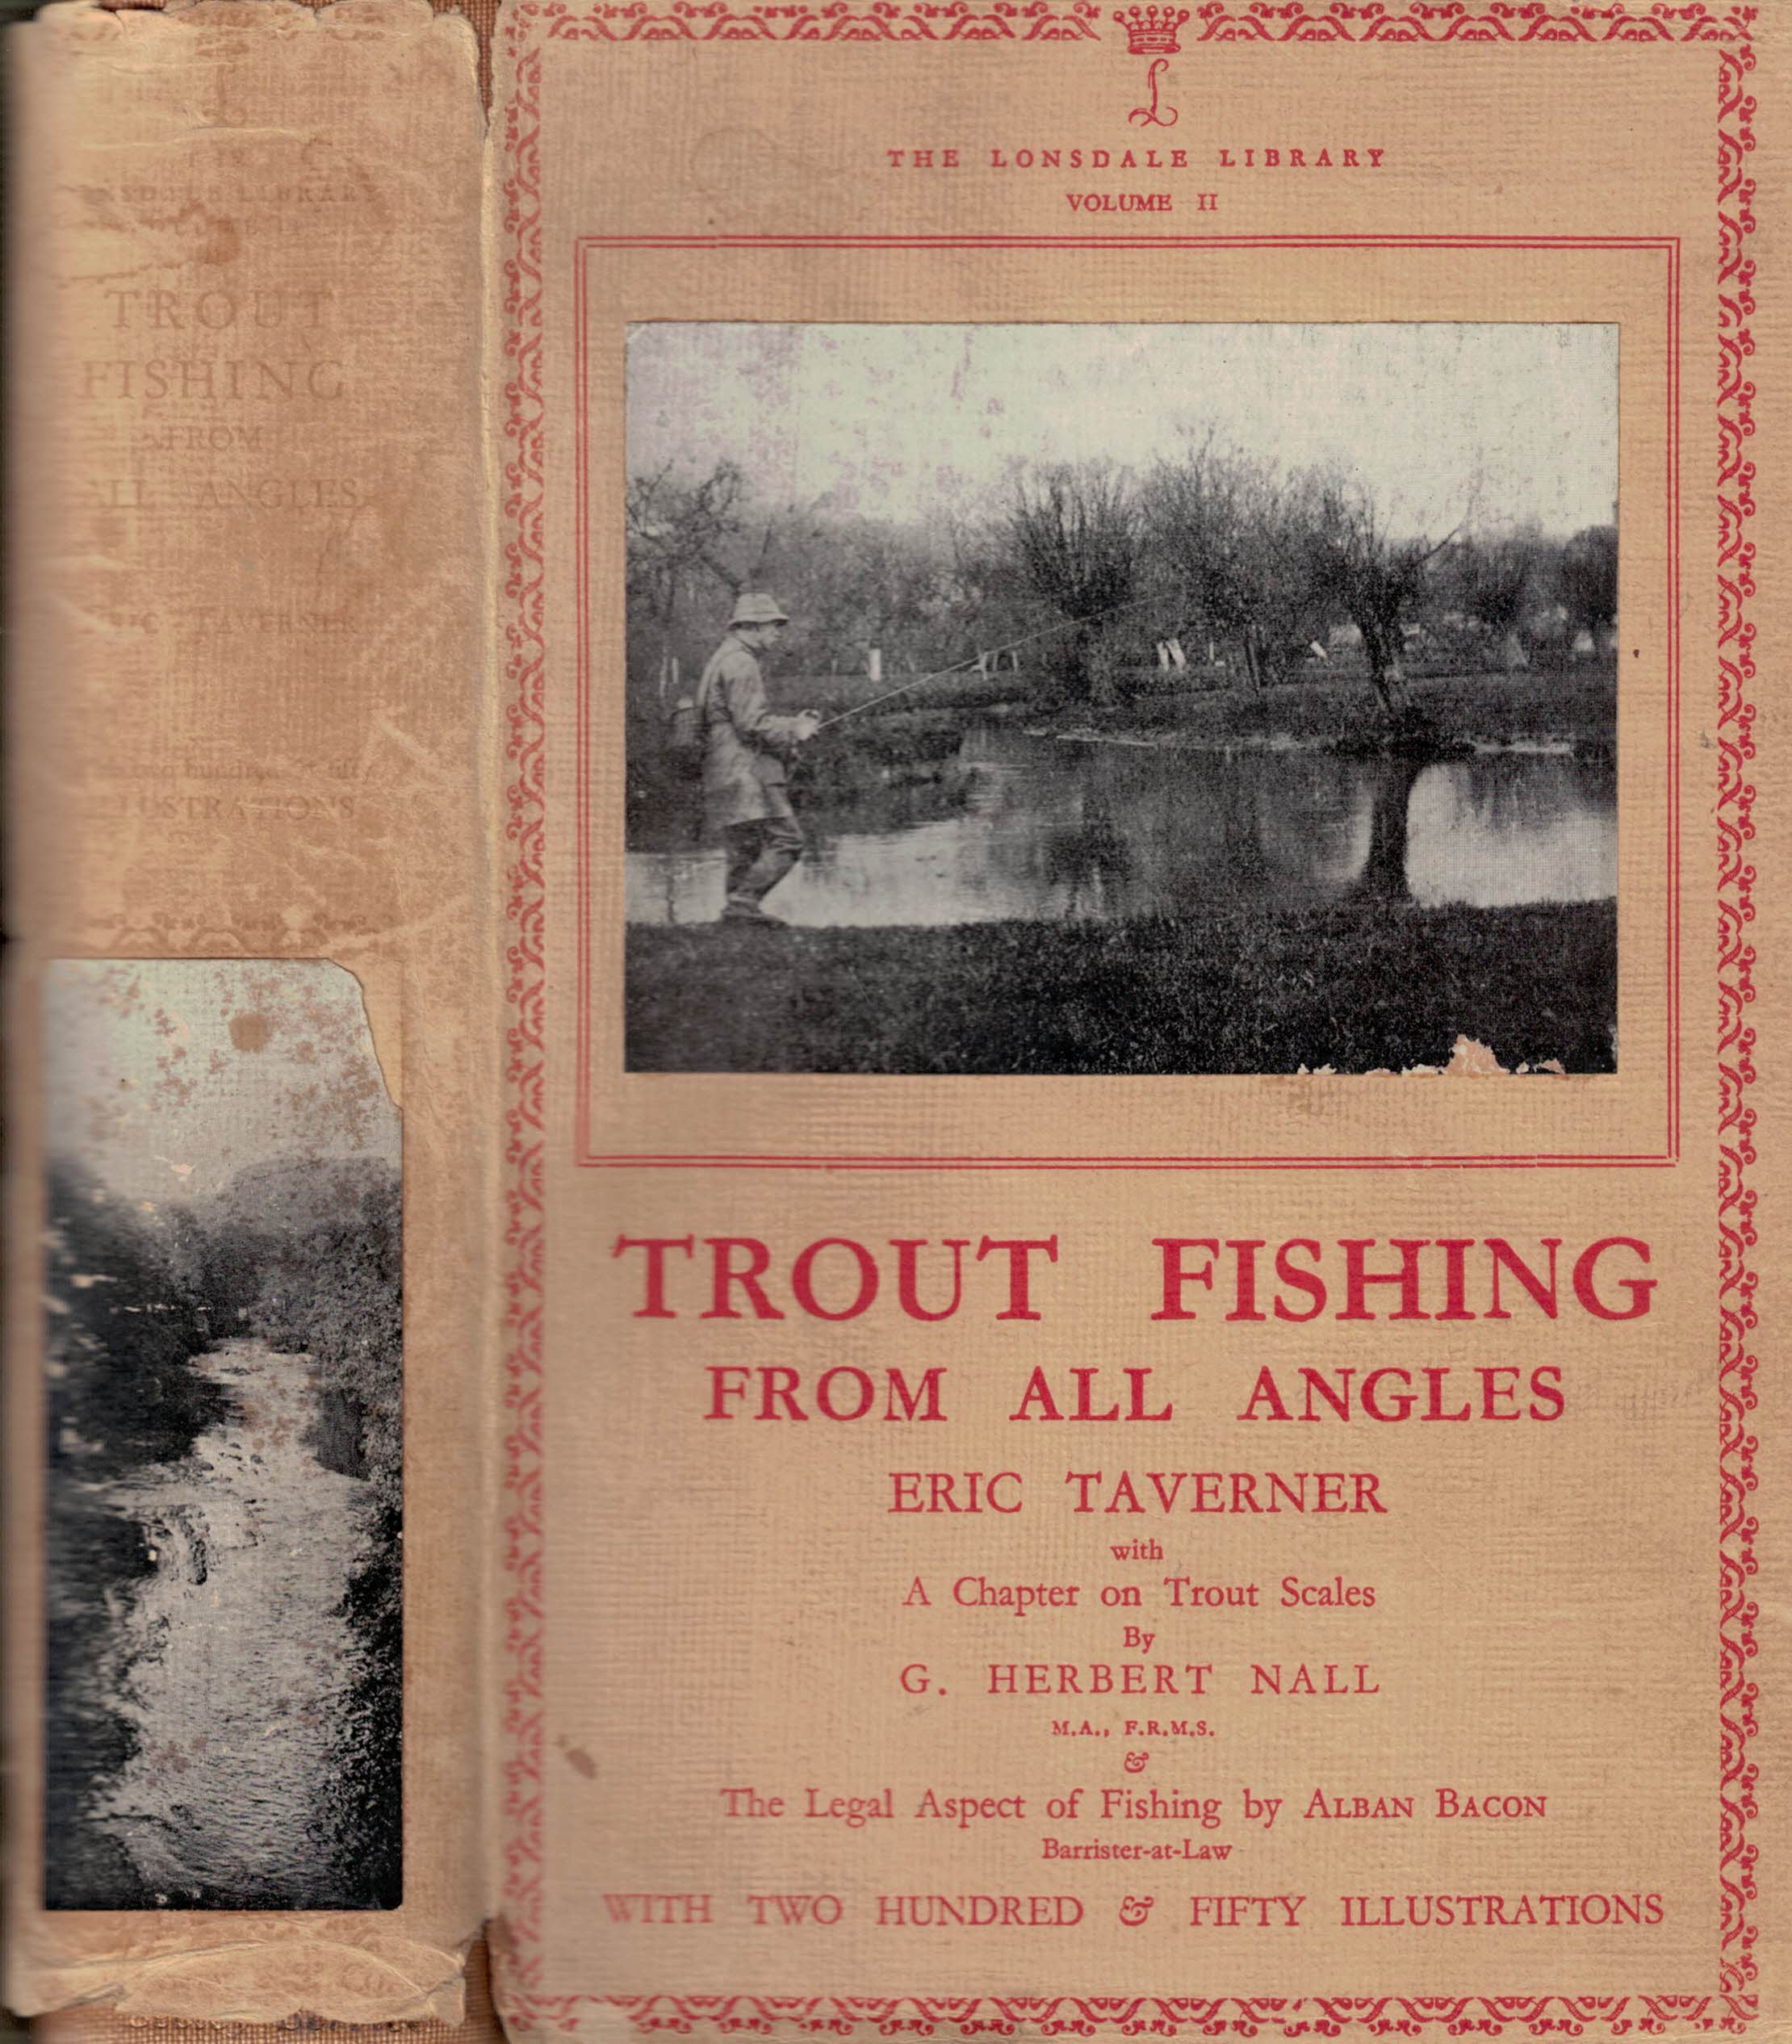 Trout Fishing from all Angles. The Lonsdale Library. Volume II. 1929.